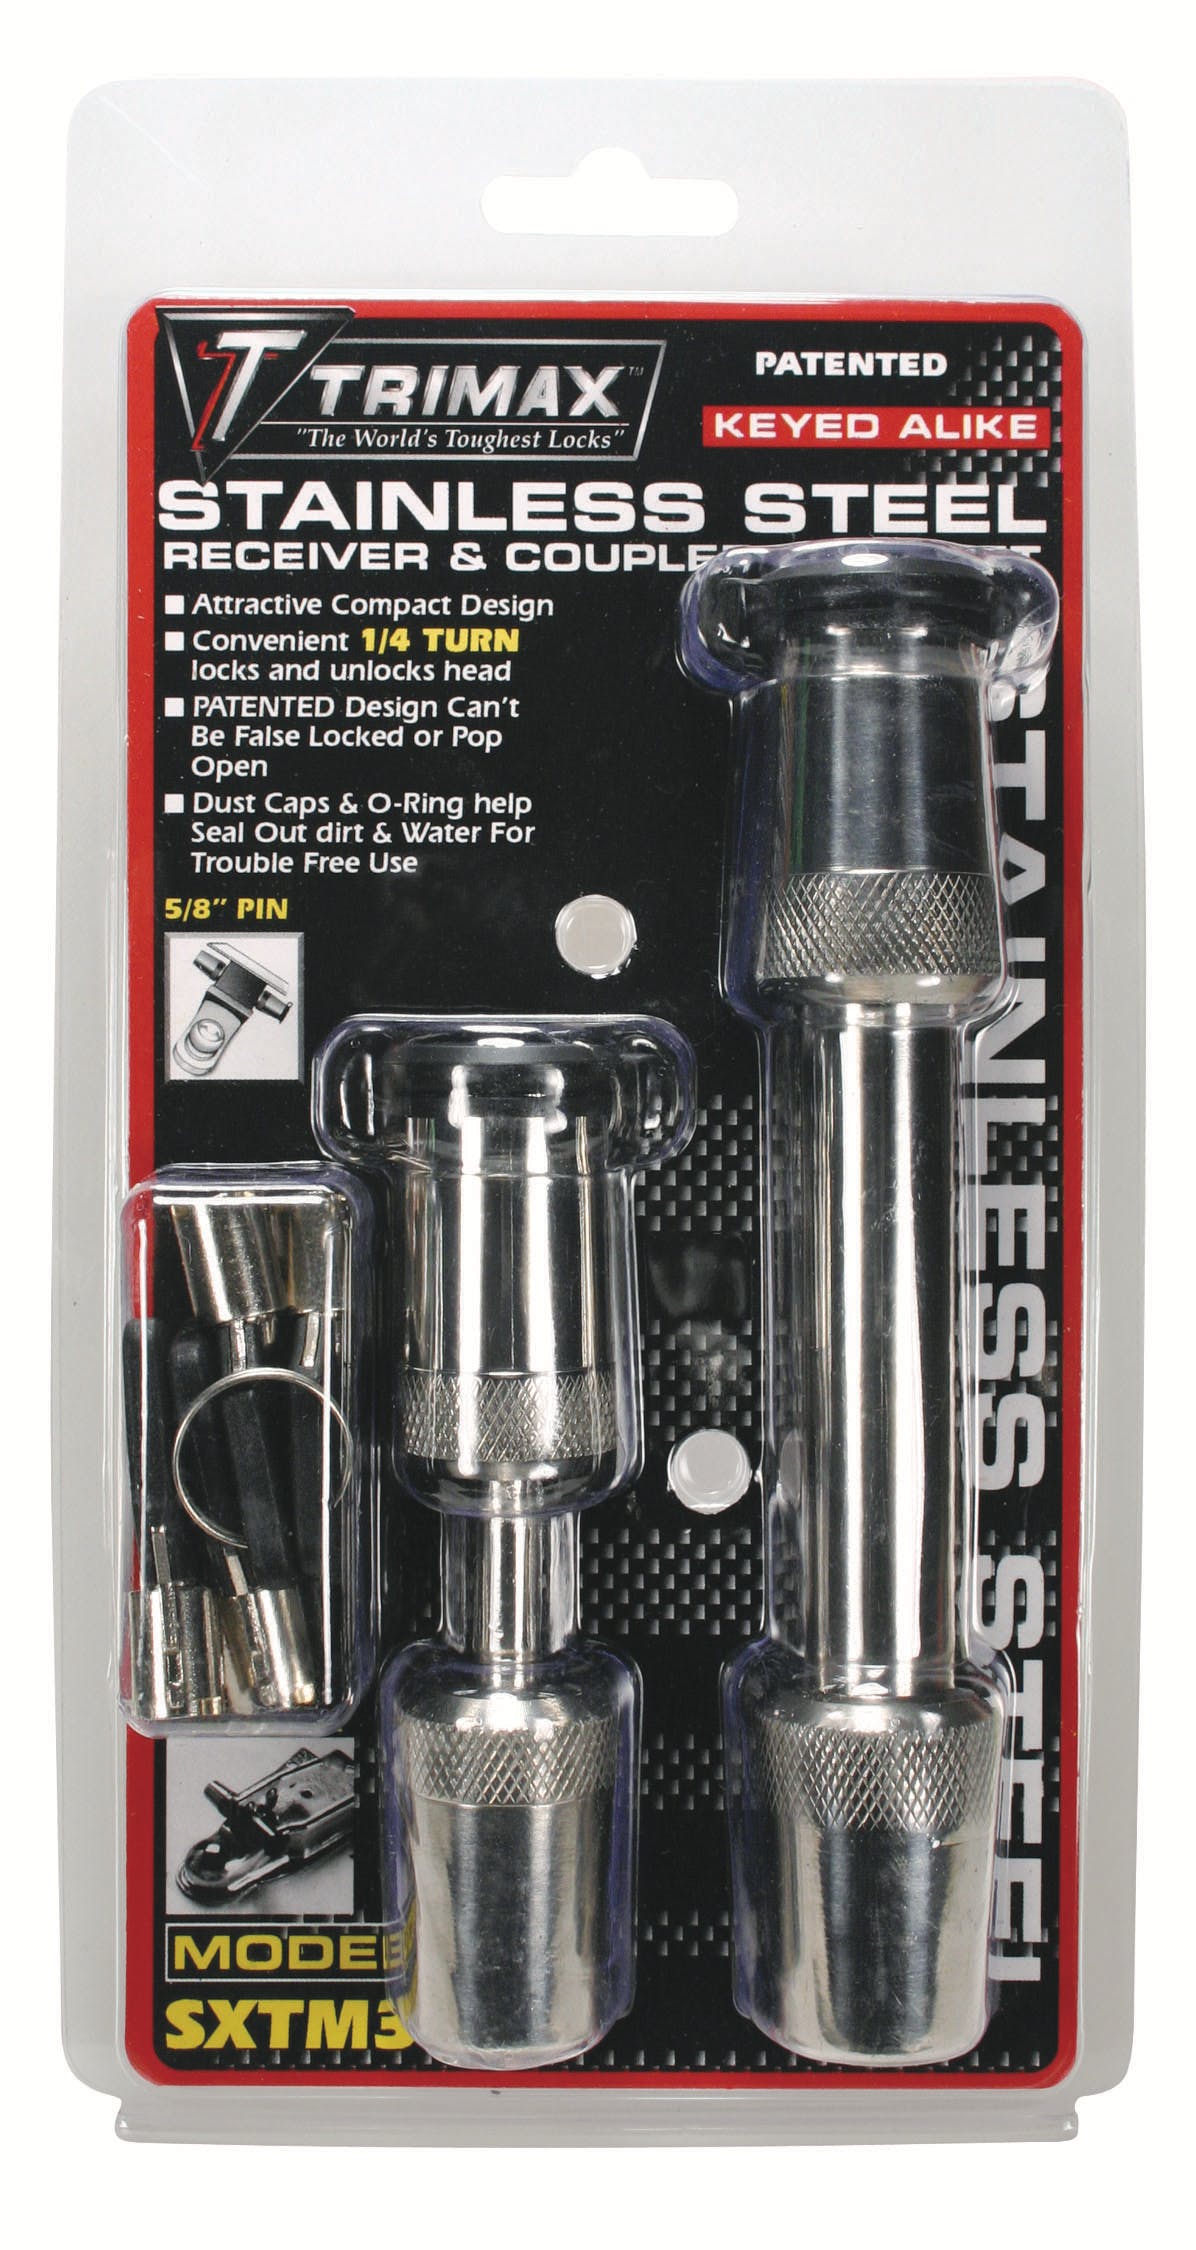 TRIMAX SXTM31 Stainless Steel Sxt3 - 5/8 inch Receiver and Tc1 - 7/8 inch Span Coupler Lock